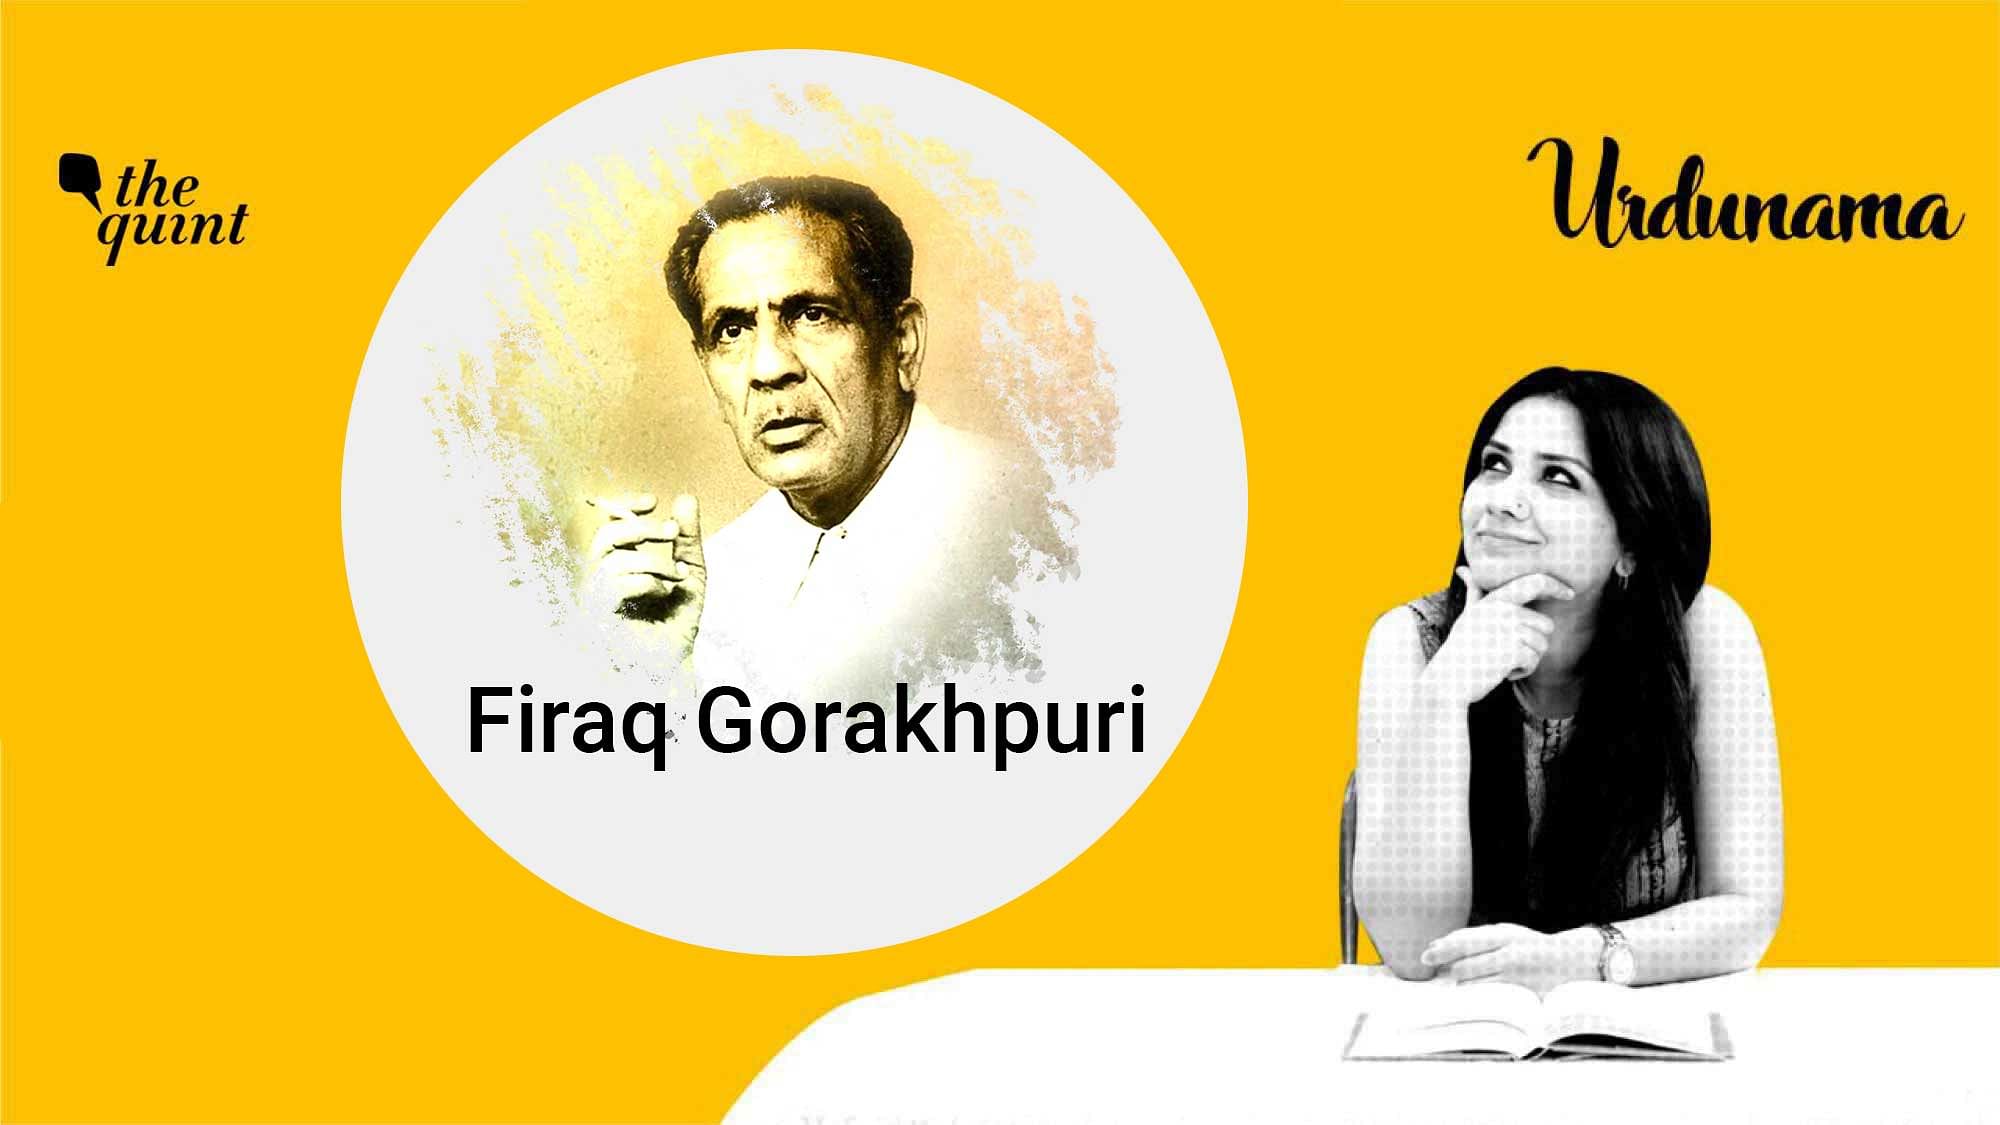 Raghupati Sahay, better known under his pen name Firaq Gorakhpuri, is known to have fought to save the idea of secular India, most of his life.